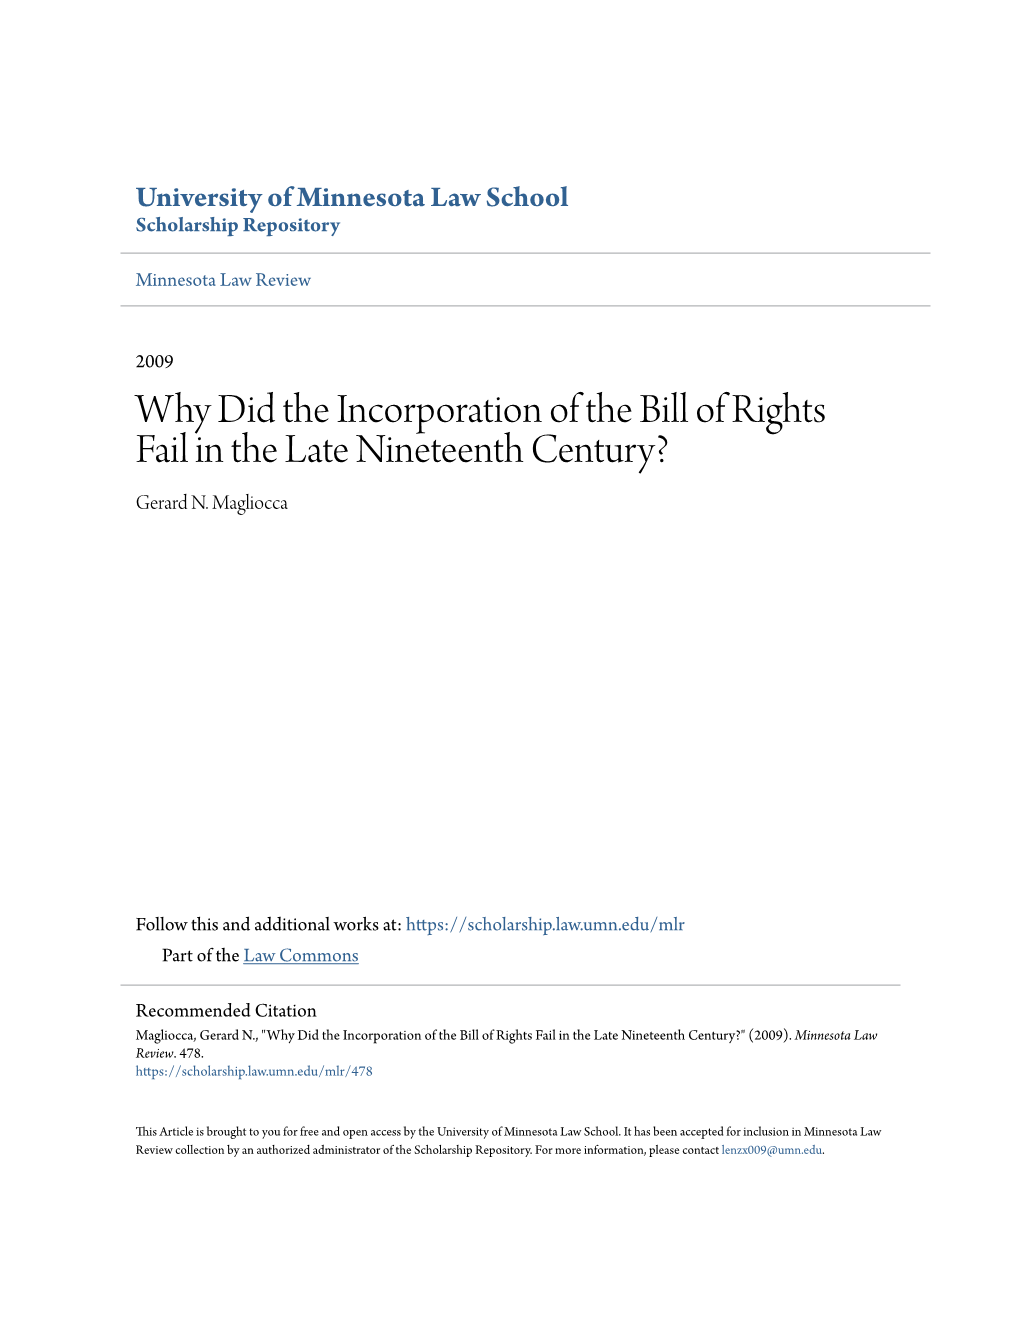 Why Did the Incorporation of the Bill of Rights Fail in the Late Nineteenth Century? Gerard N